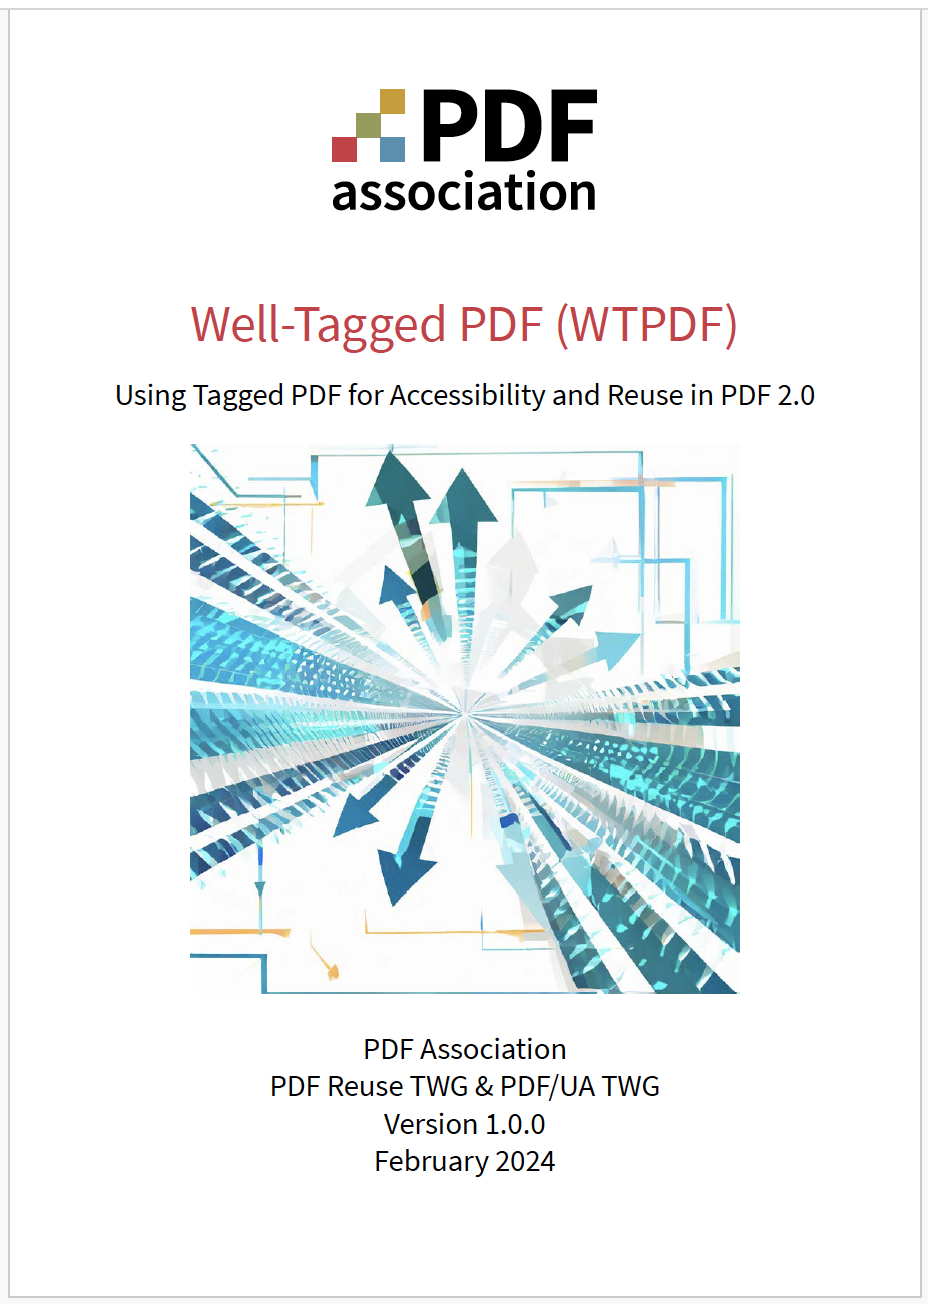 PDF Association, Well-Tagged PDF (WTPDF), Front Cover - Picture